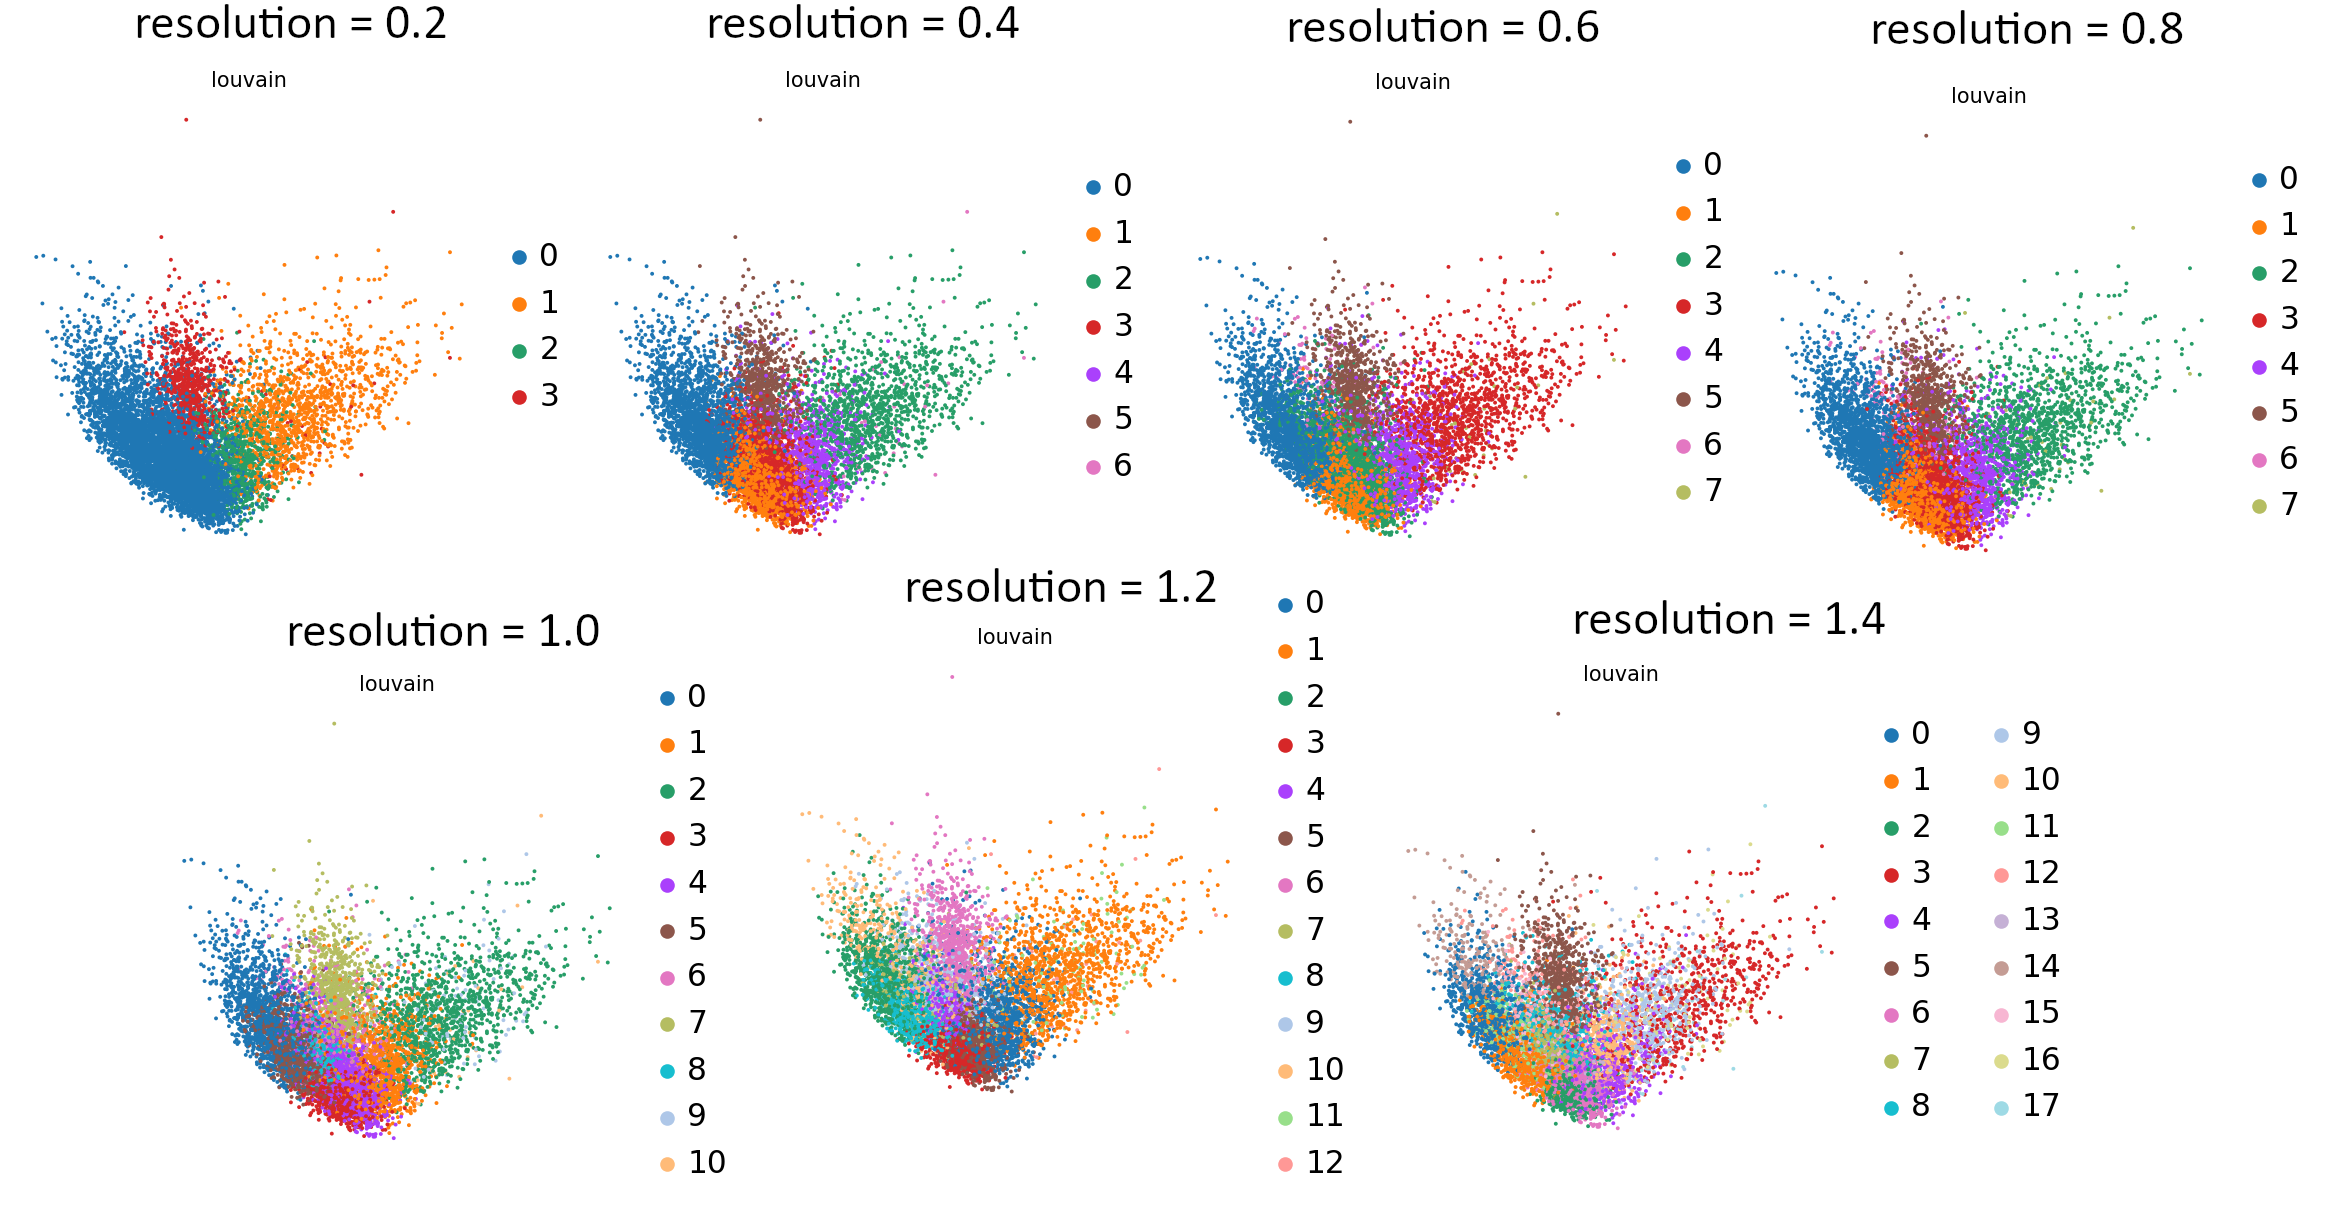 Graphs showing the differences between PCA embeddings caused by different values of resolution.